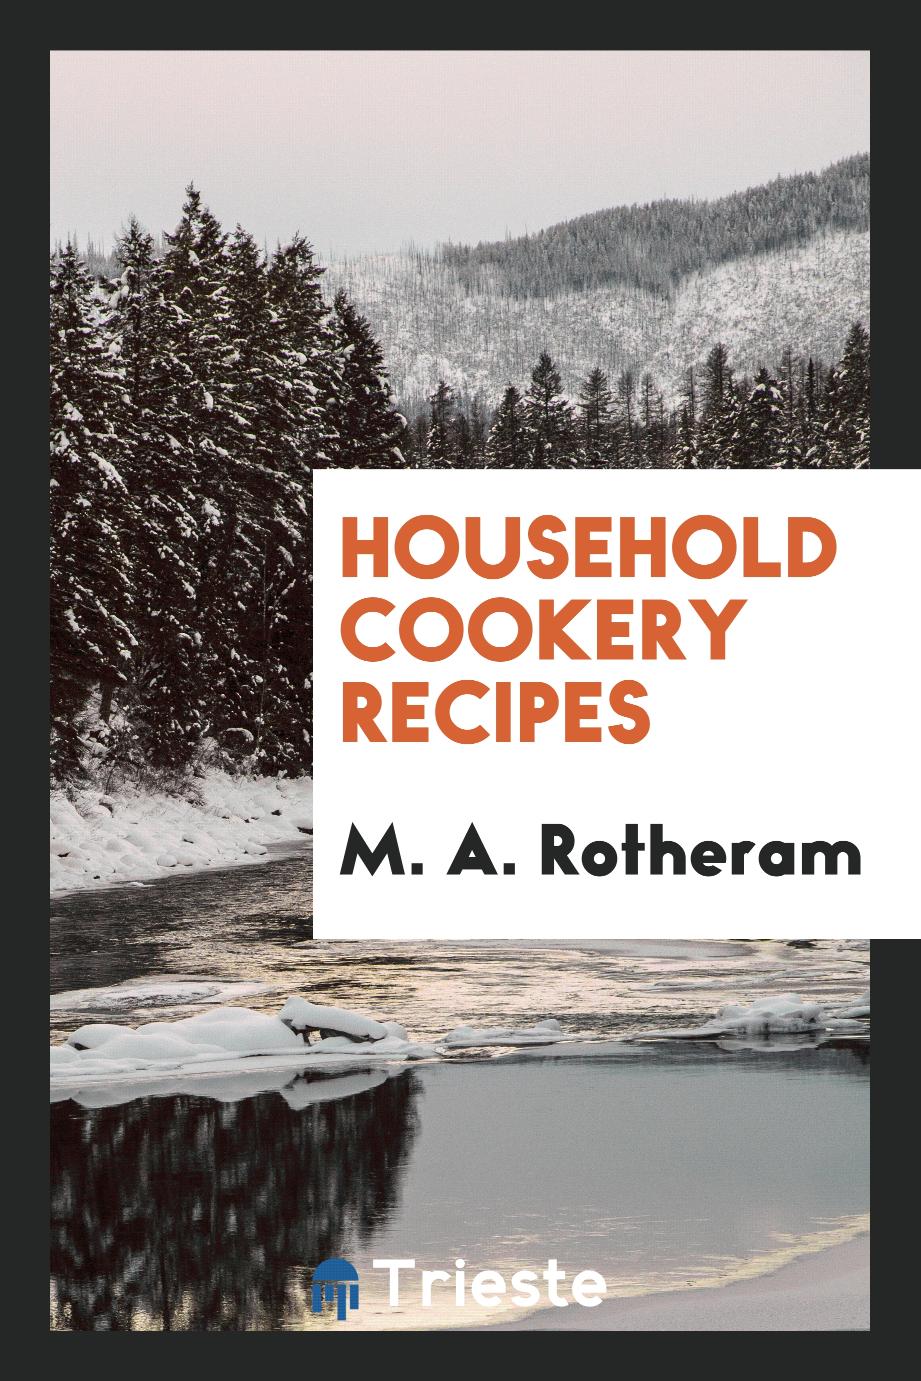 Household cookery recipes